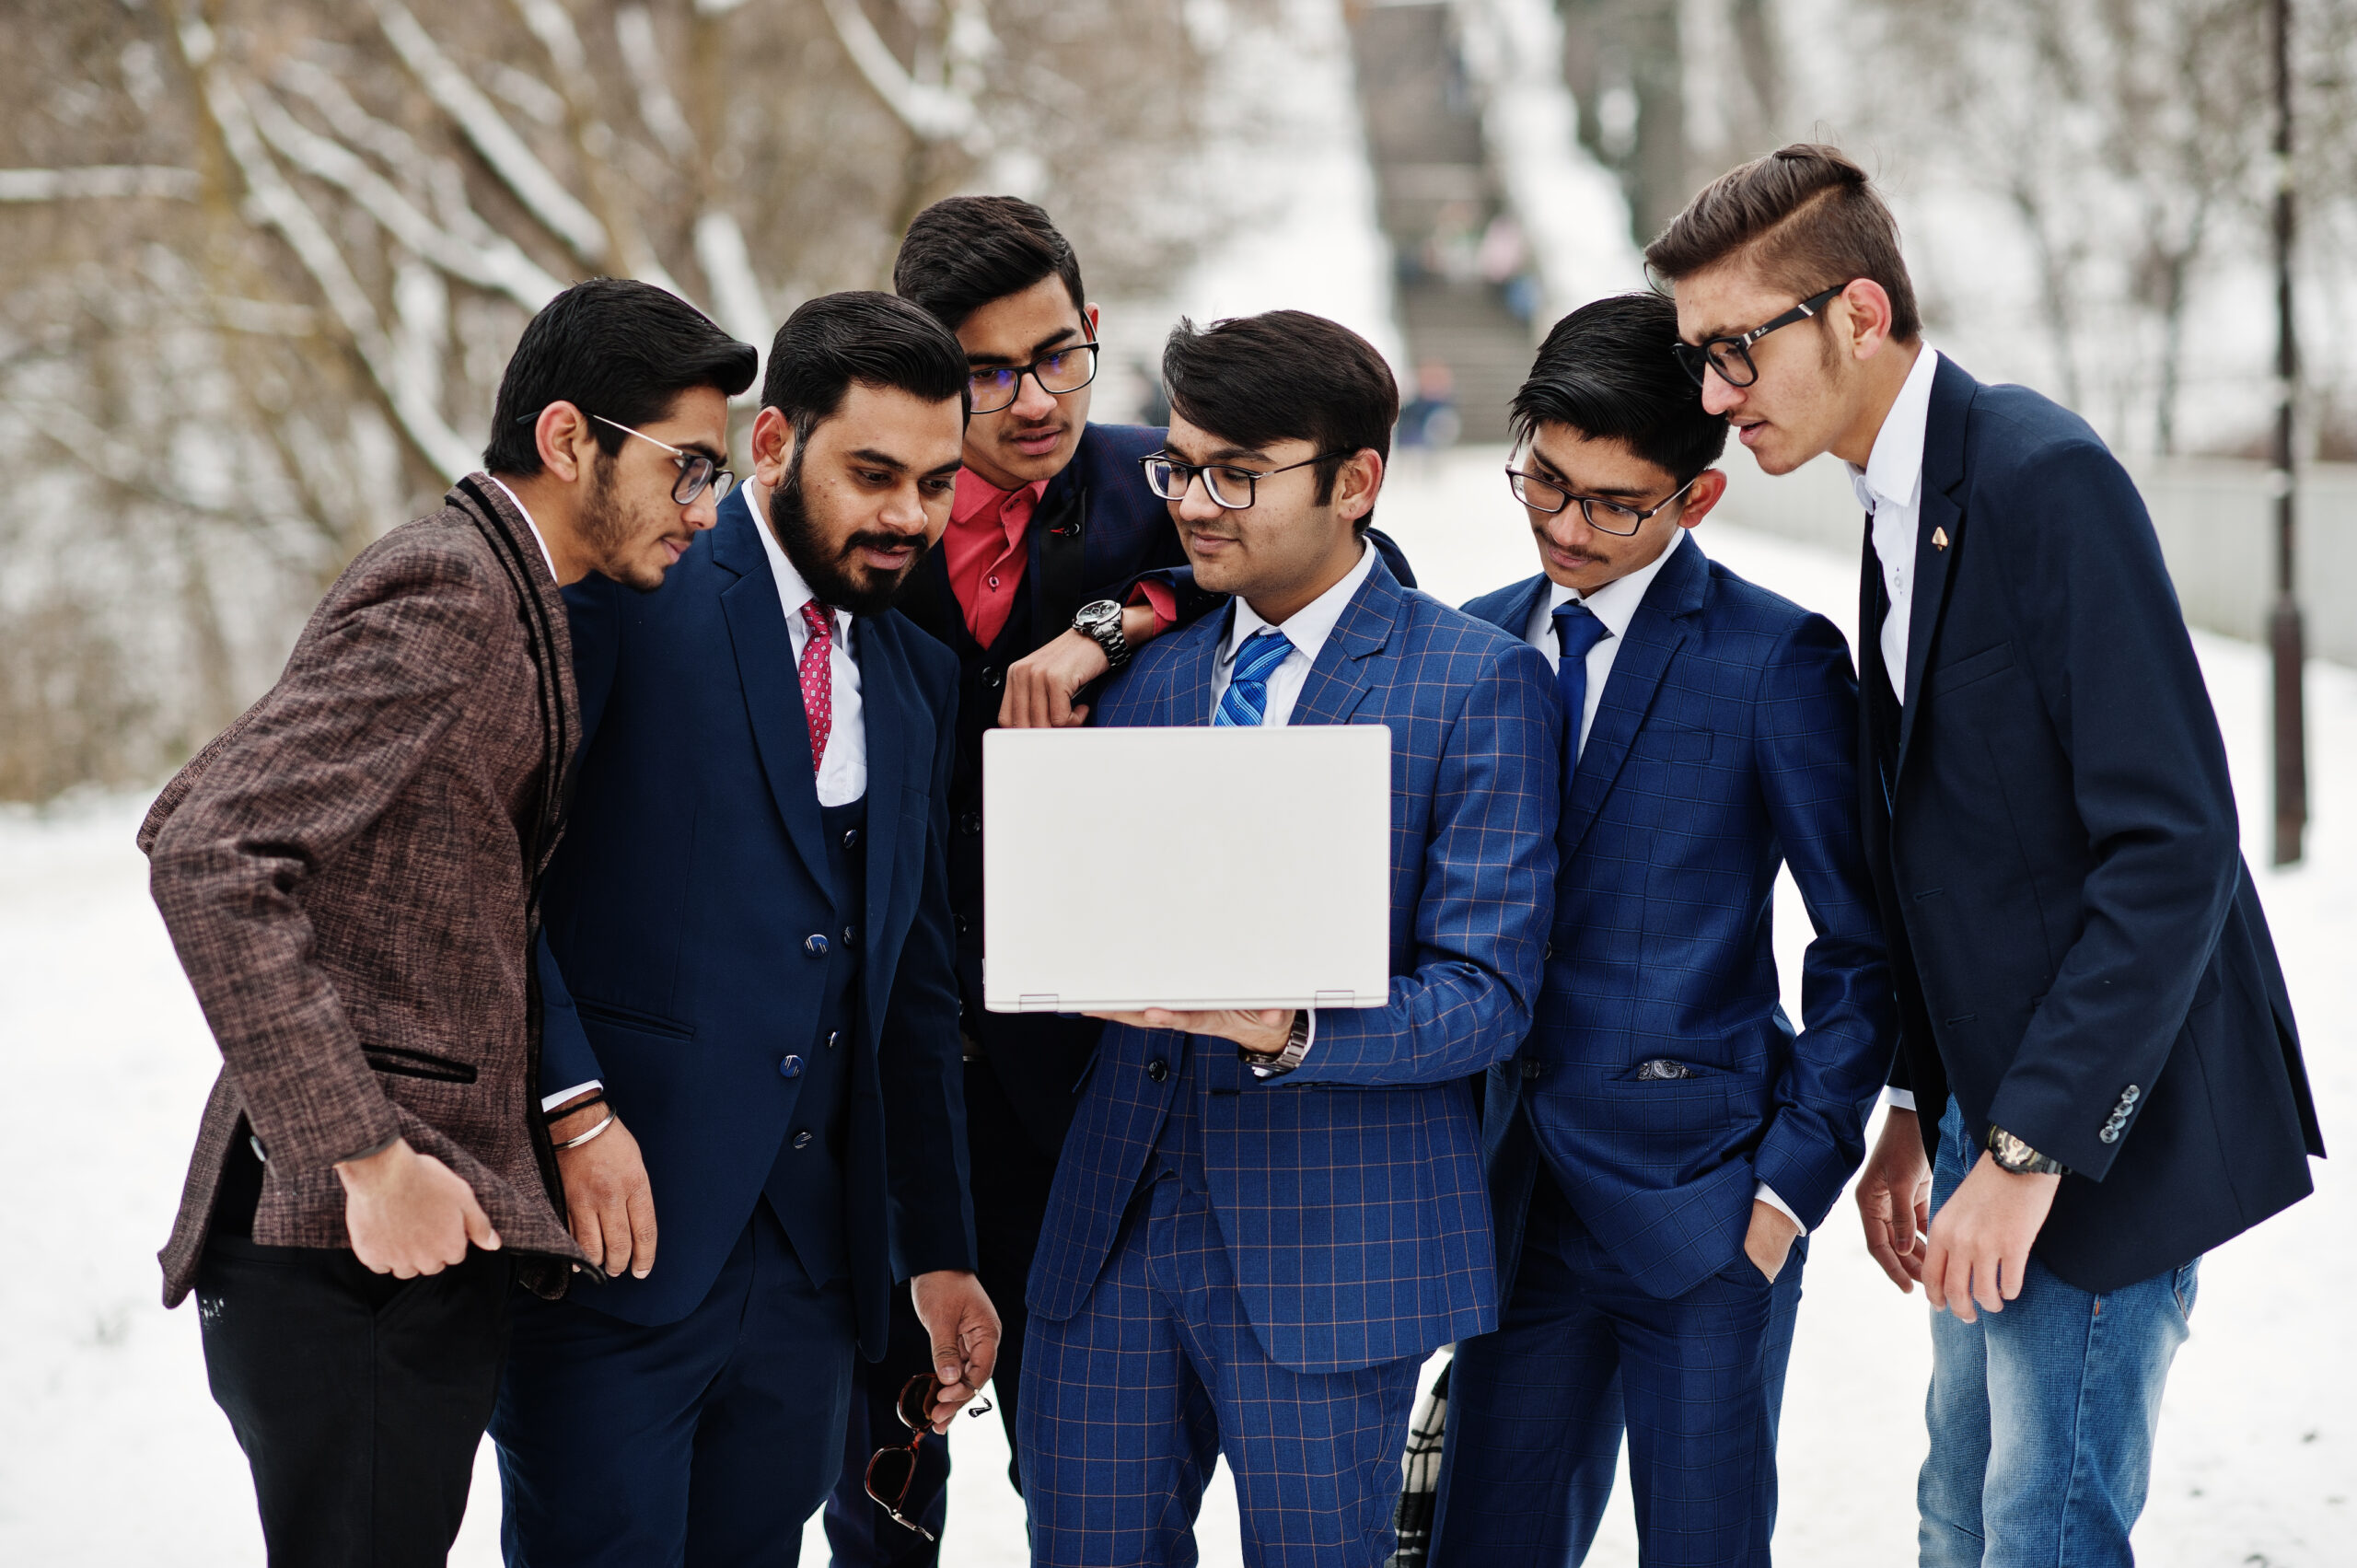 Group of six indian businessman in suits posed outdoor in winter